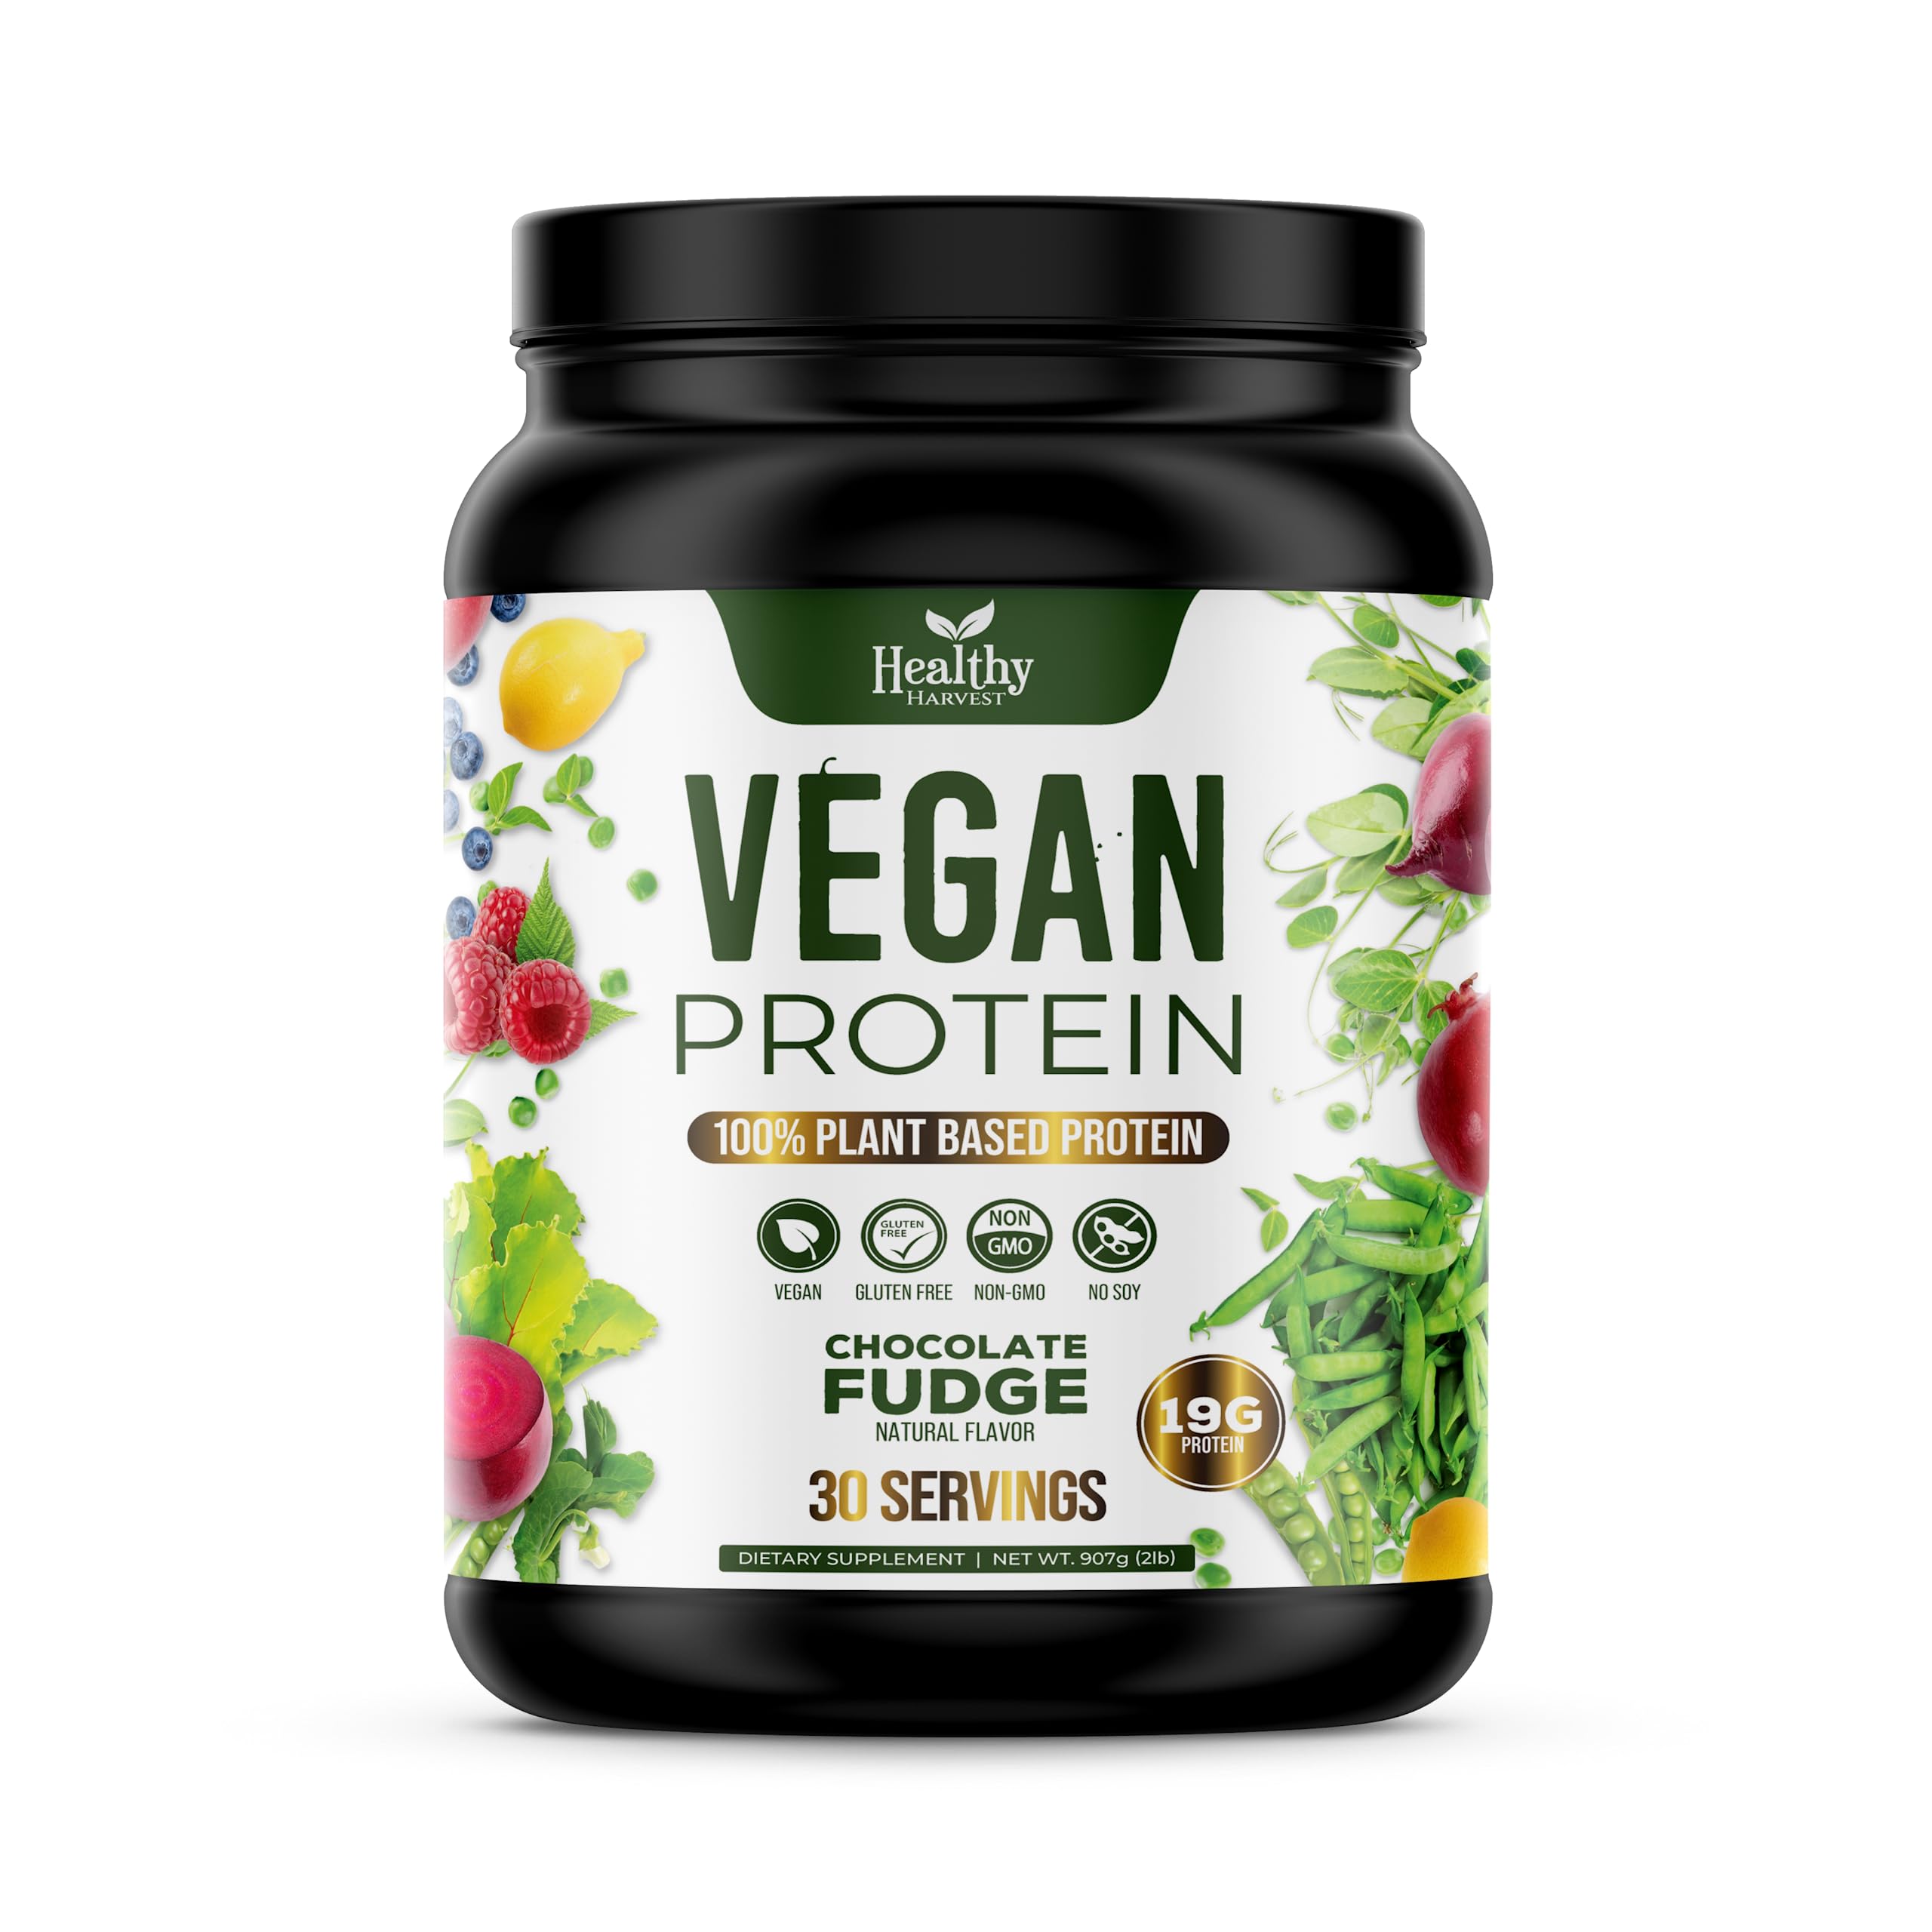 Vegan Protein Powder - 19g Plant Based Protein - Gluten, Dairy, Lactose, Soy Free, Includes Superfoods & BCAAs, For Smoothies & Shakes, Kosher, Keto-friendly, Chocolate Flavor - 2 LB, 30 Servings